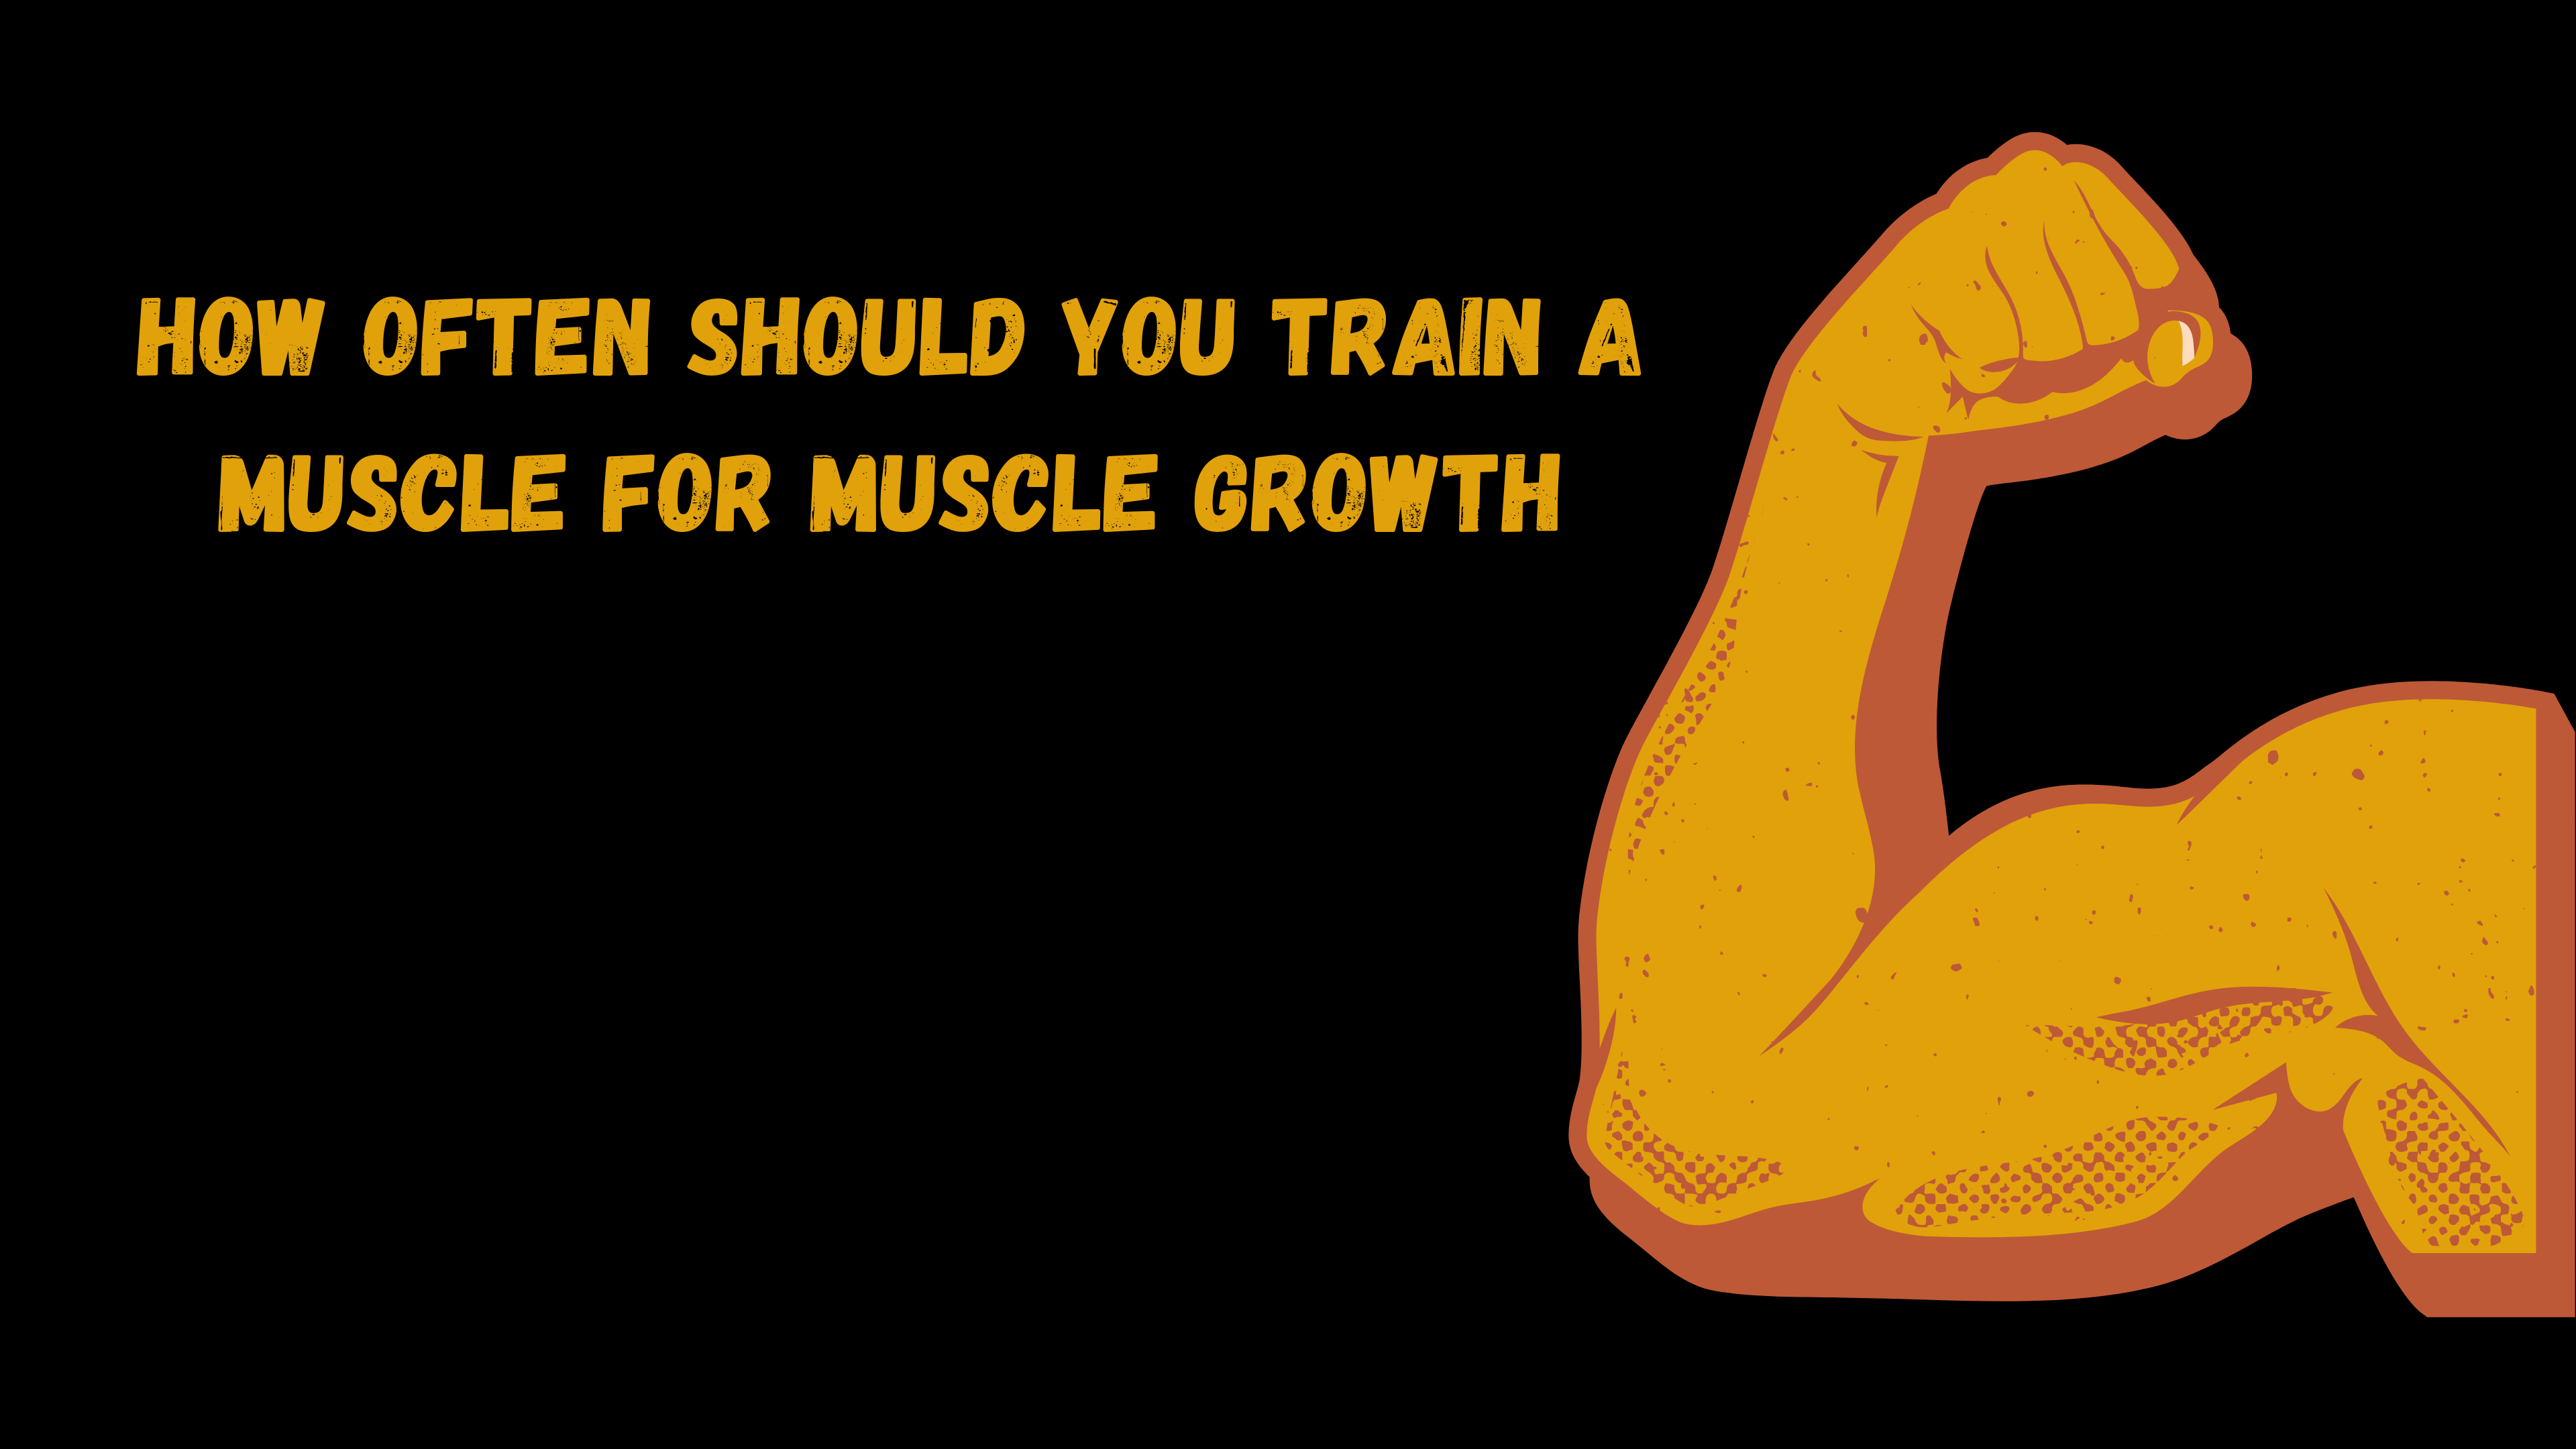 How often should you train a muscle for muscle growth